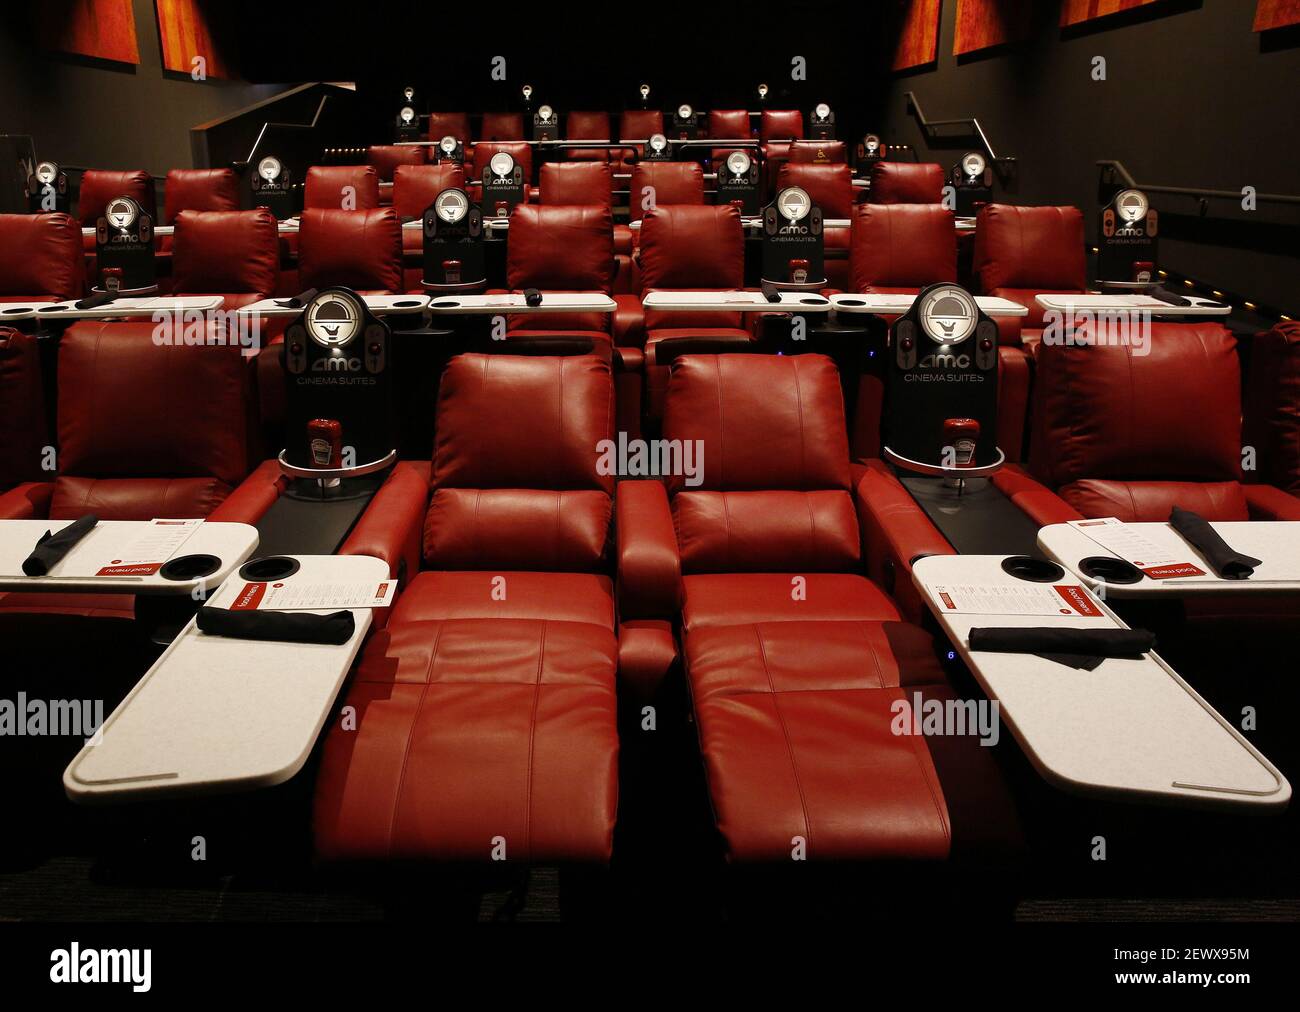 Reclining theater seats with pivoting dining trays are among the amenities  in AMC's Dine-In Theatre at Block 37 in downtown Chicago, Ill. AMC says  theaters with recliners have seen a 40 to